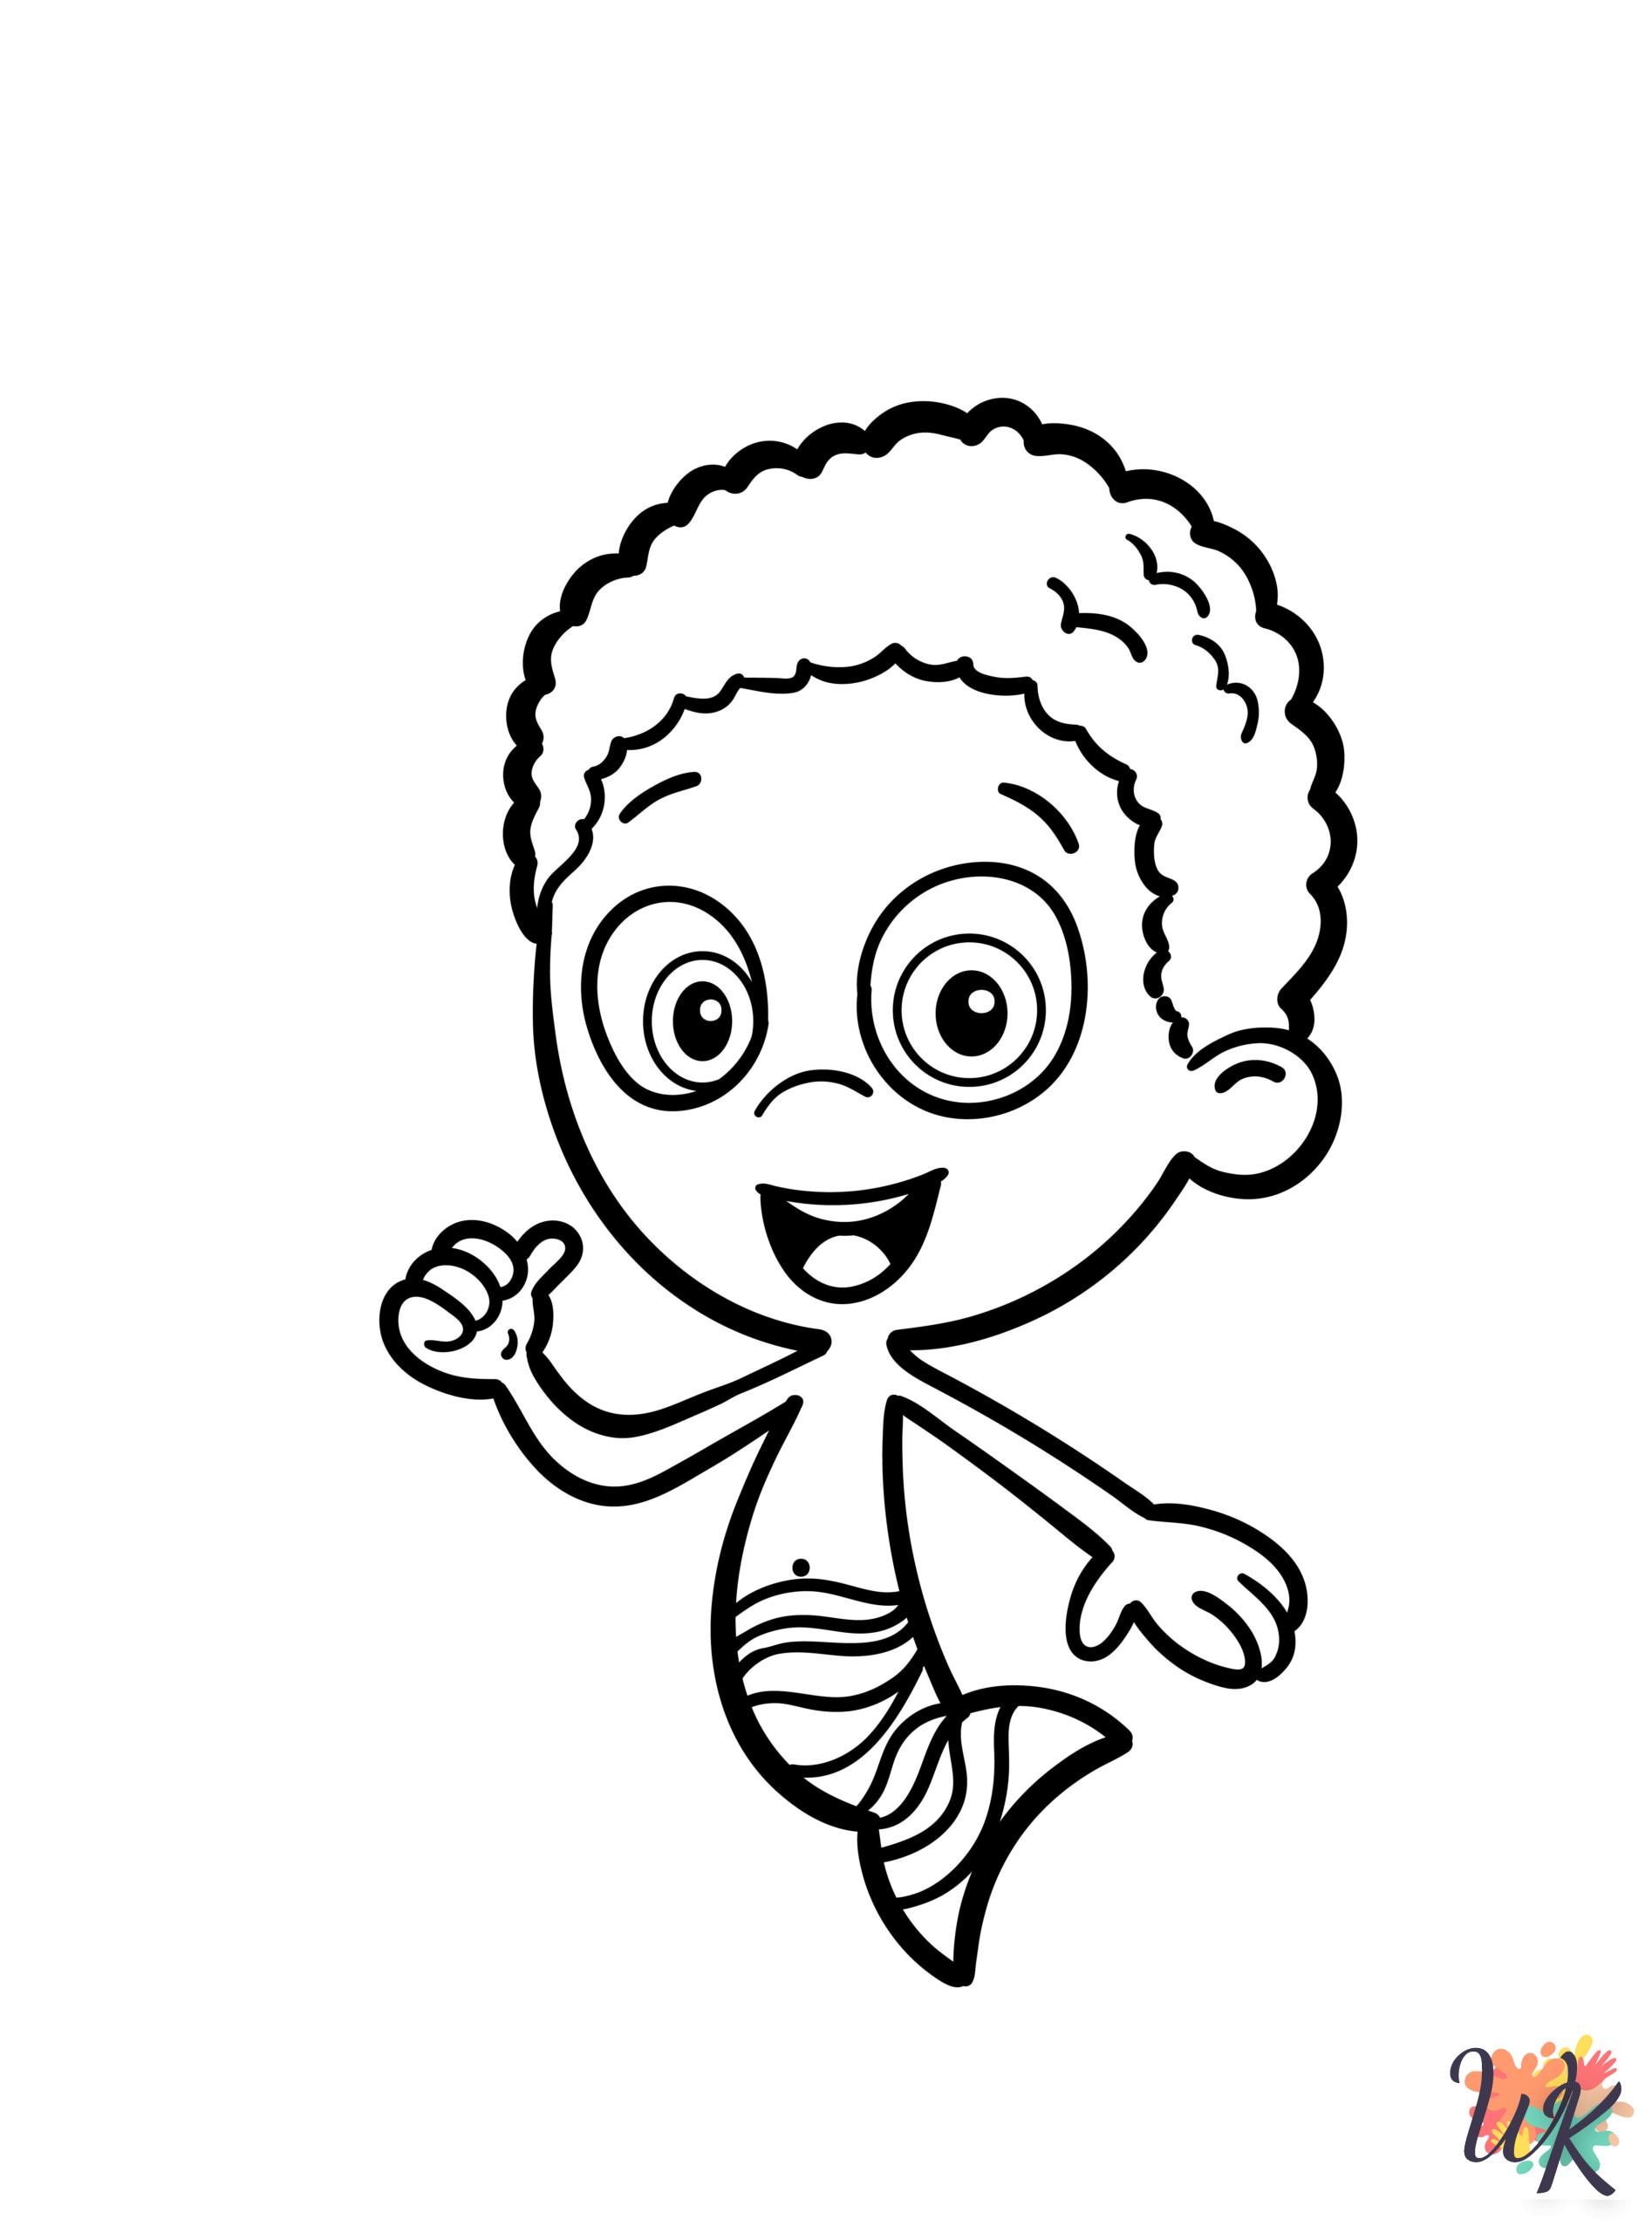 Bubble Guppies adult coloring pages